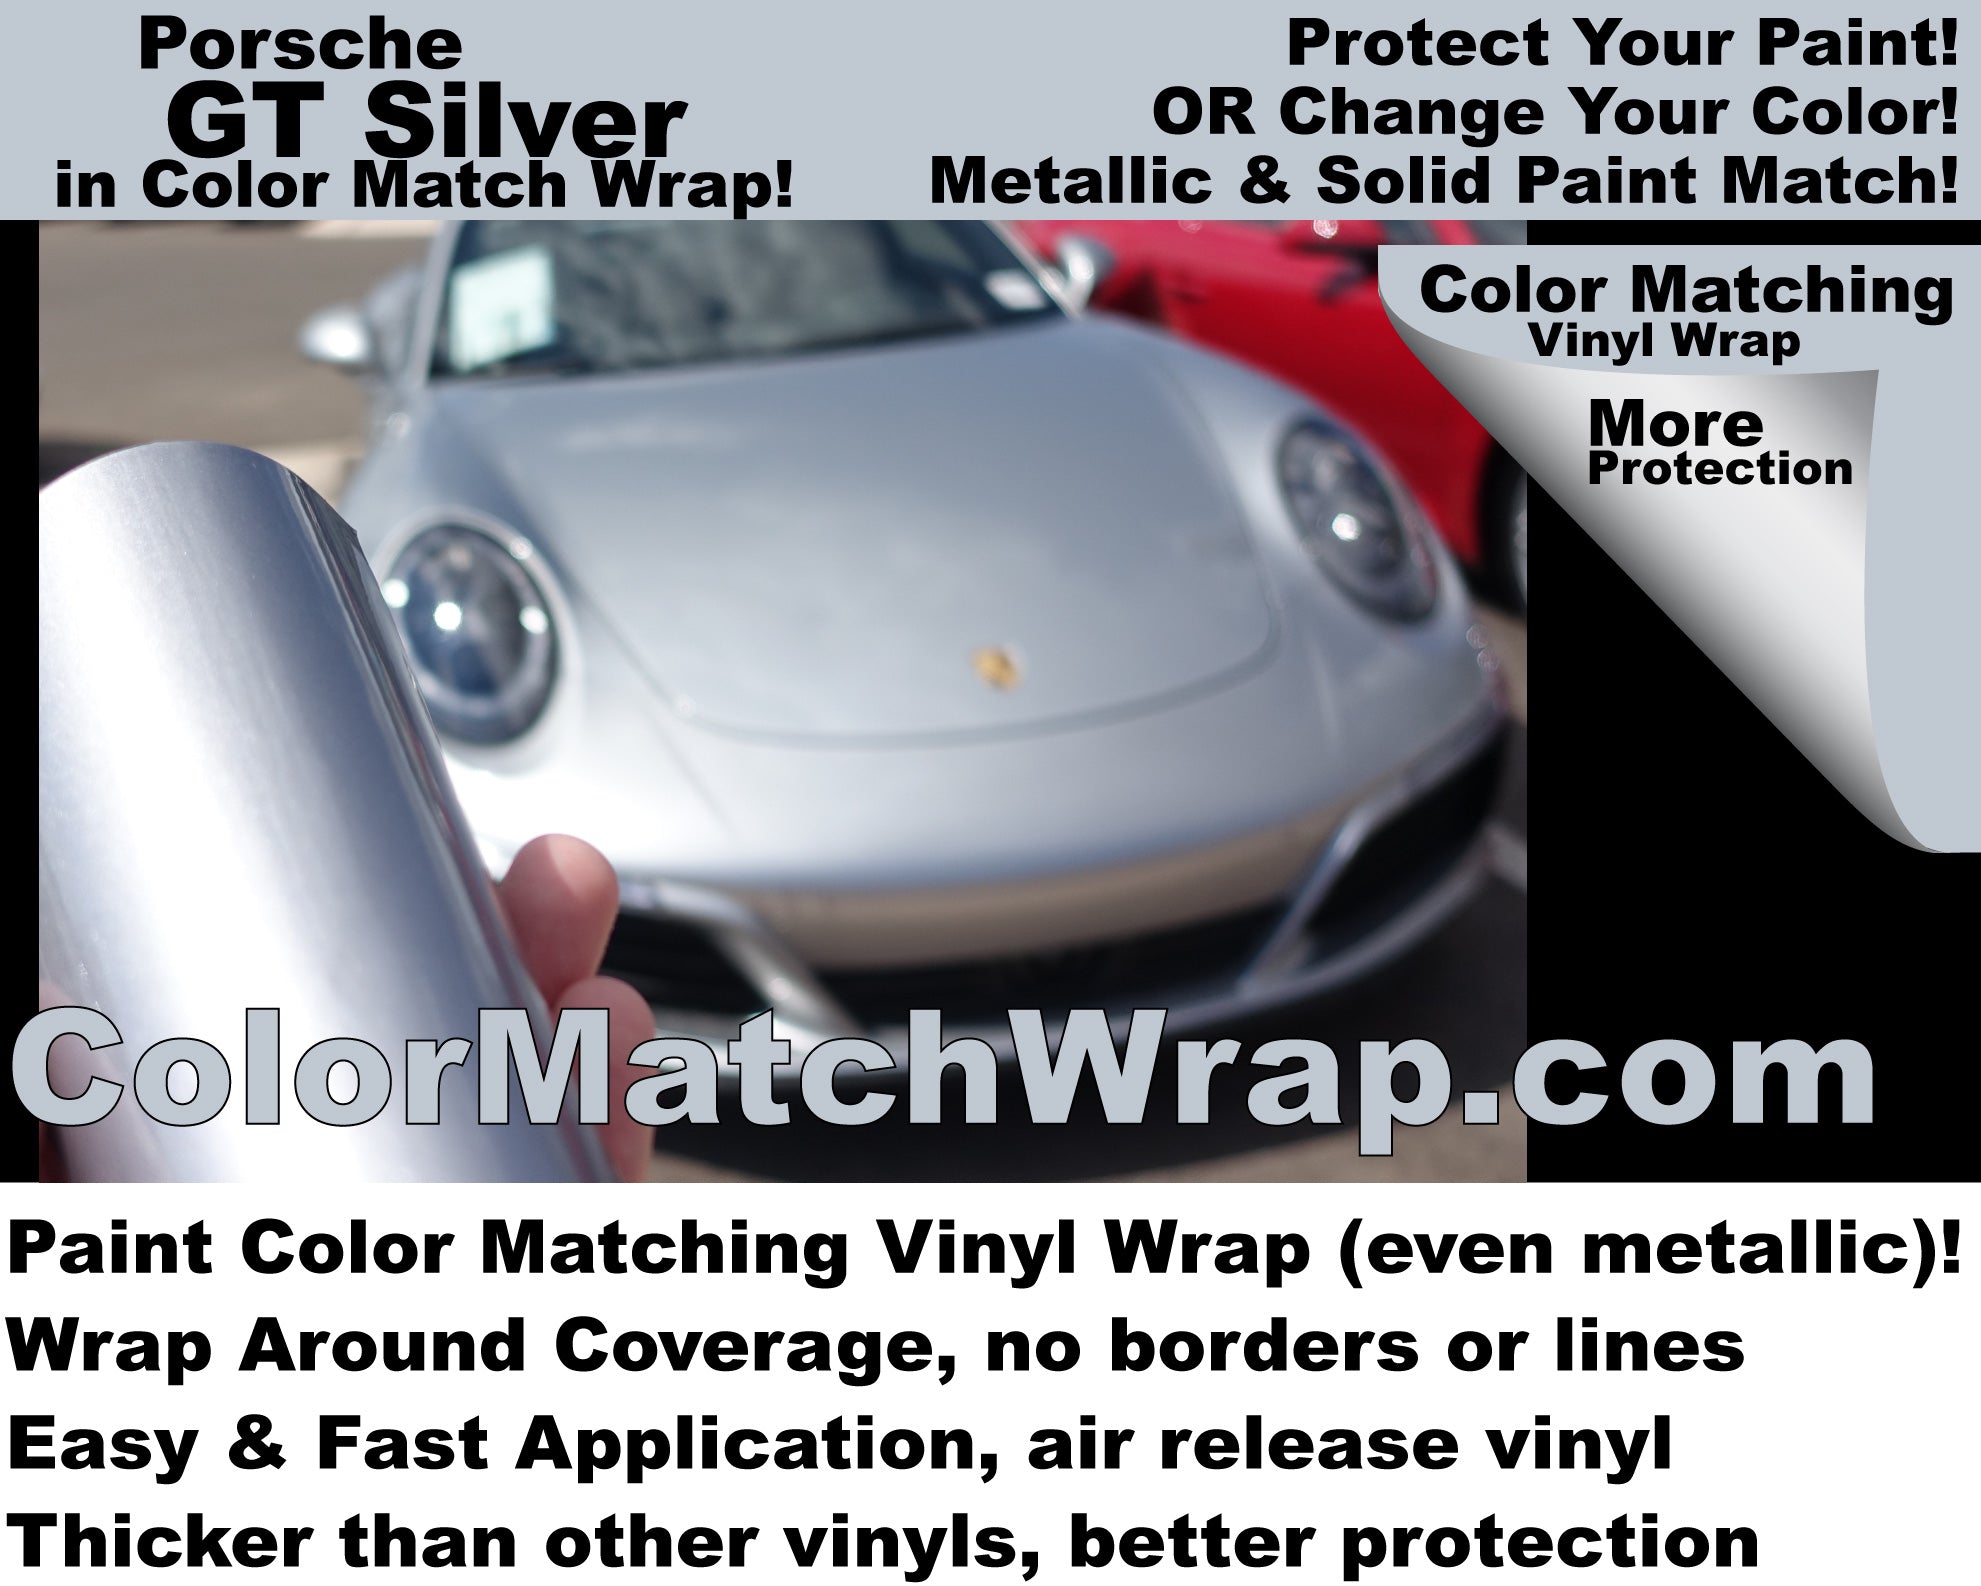 What is a Metallic and How is it Matched?